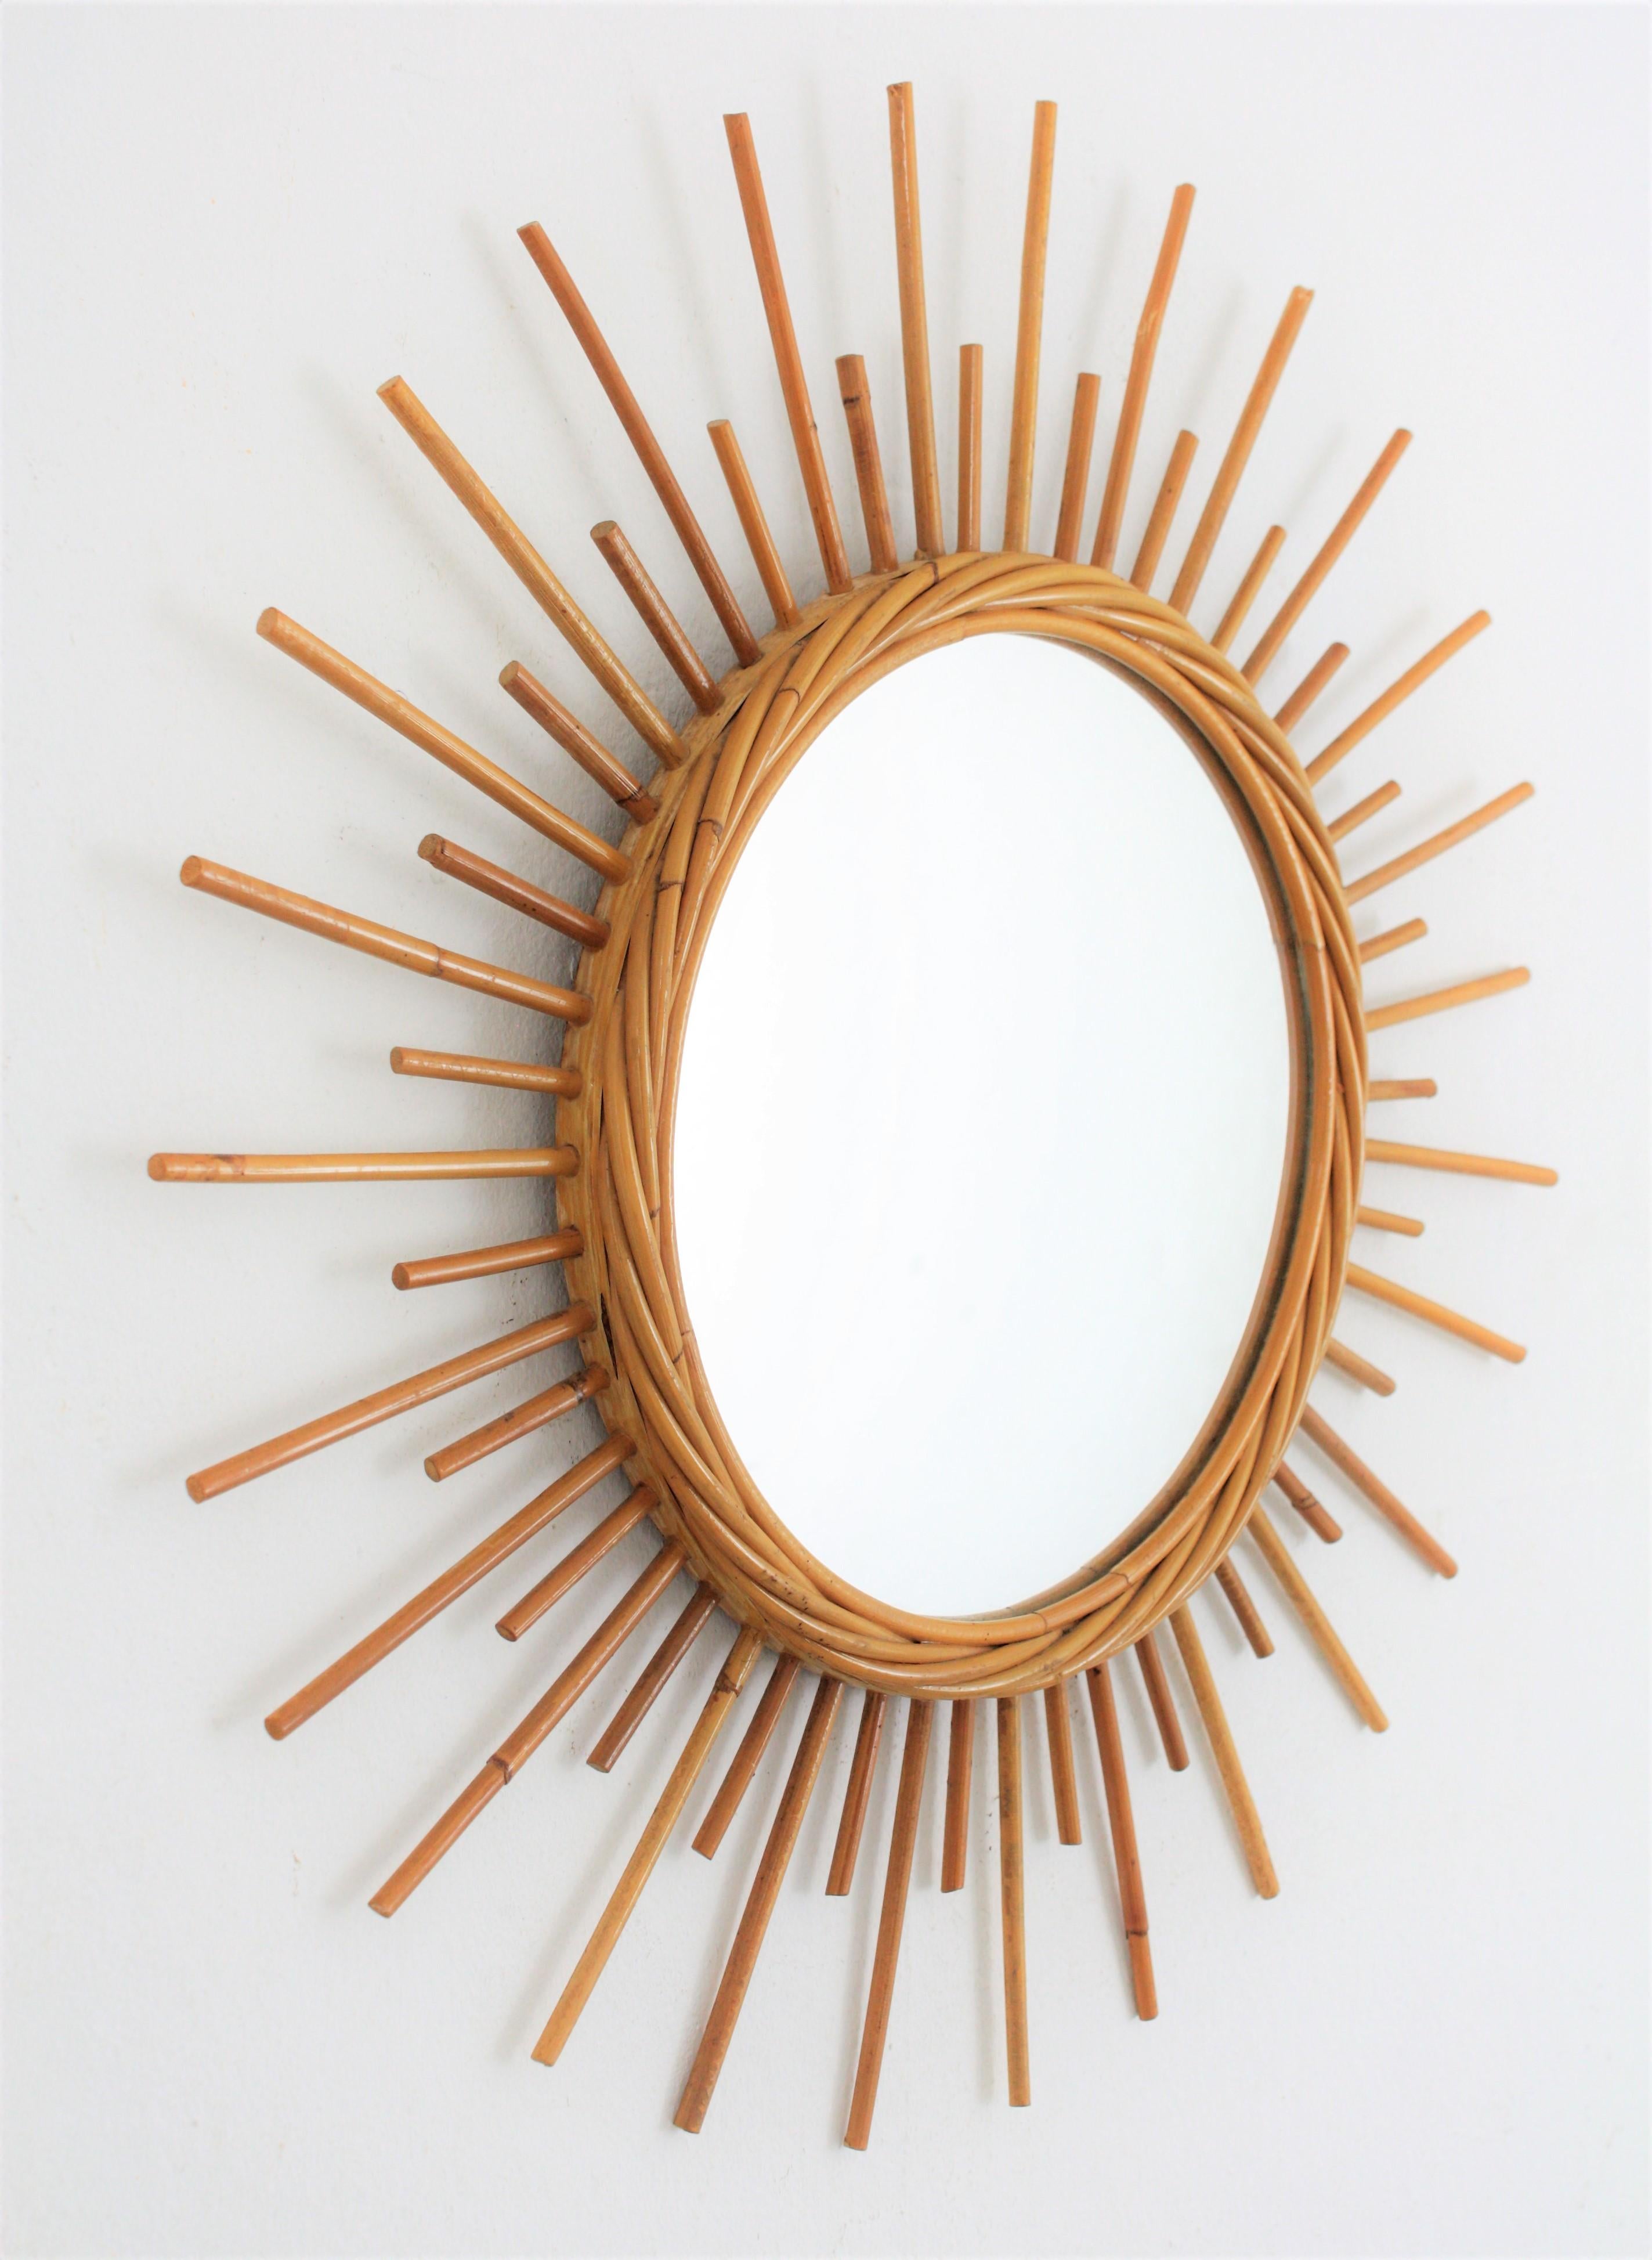 Rattan Sunburst Mirror from the French Riviera, 1960s For Sale 3